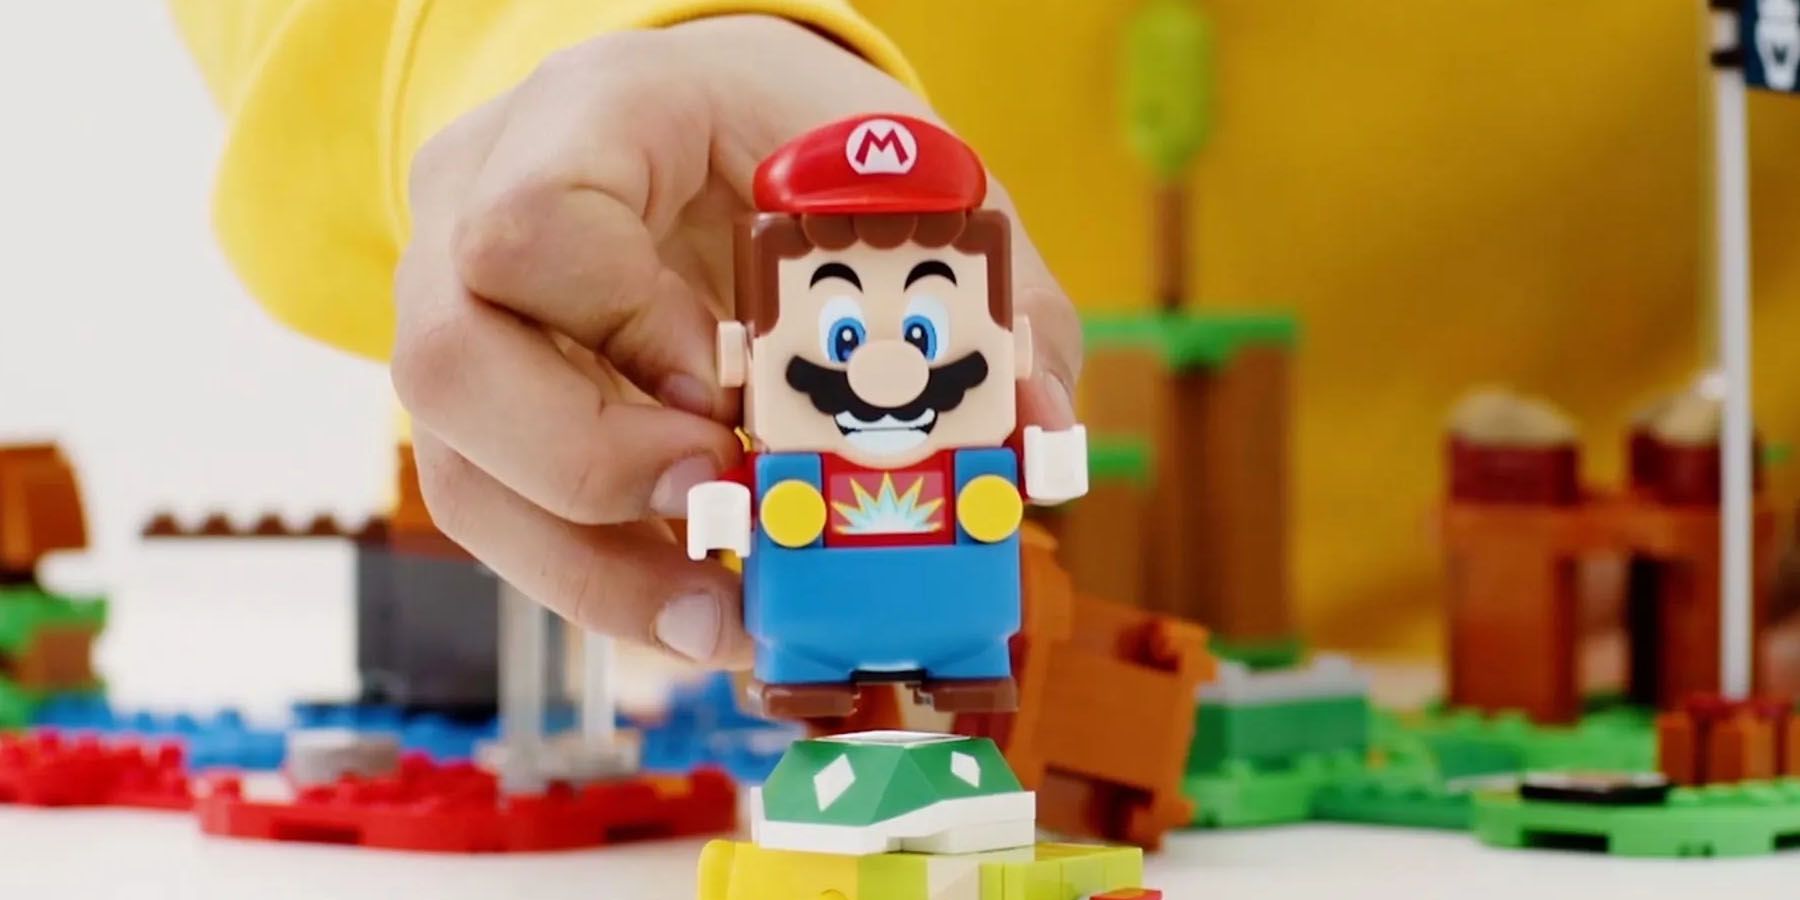 A promotional image of a kid playing with the LEGO Super Mario figure.